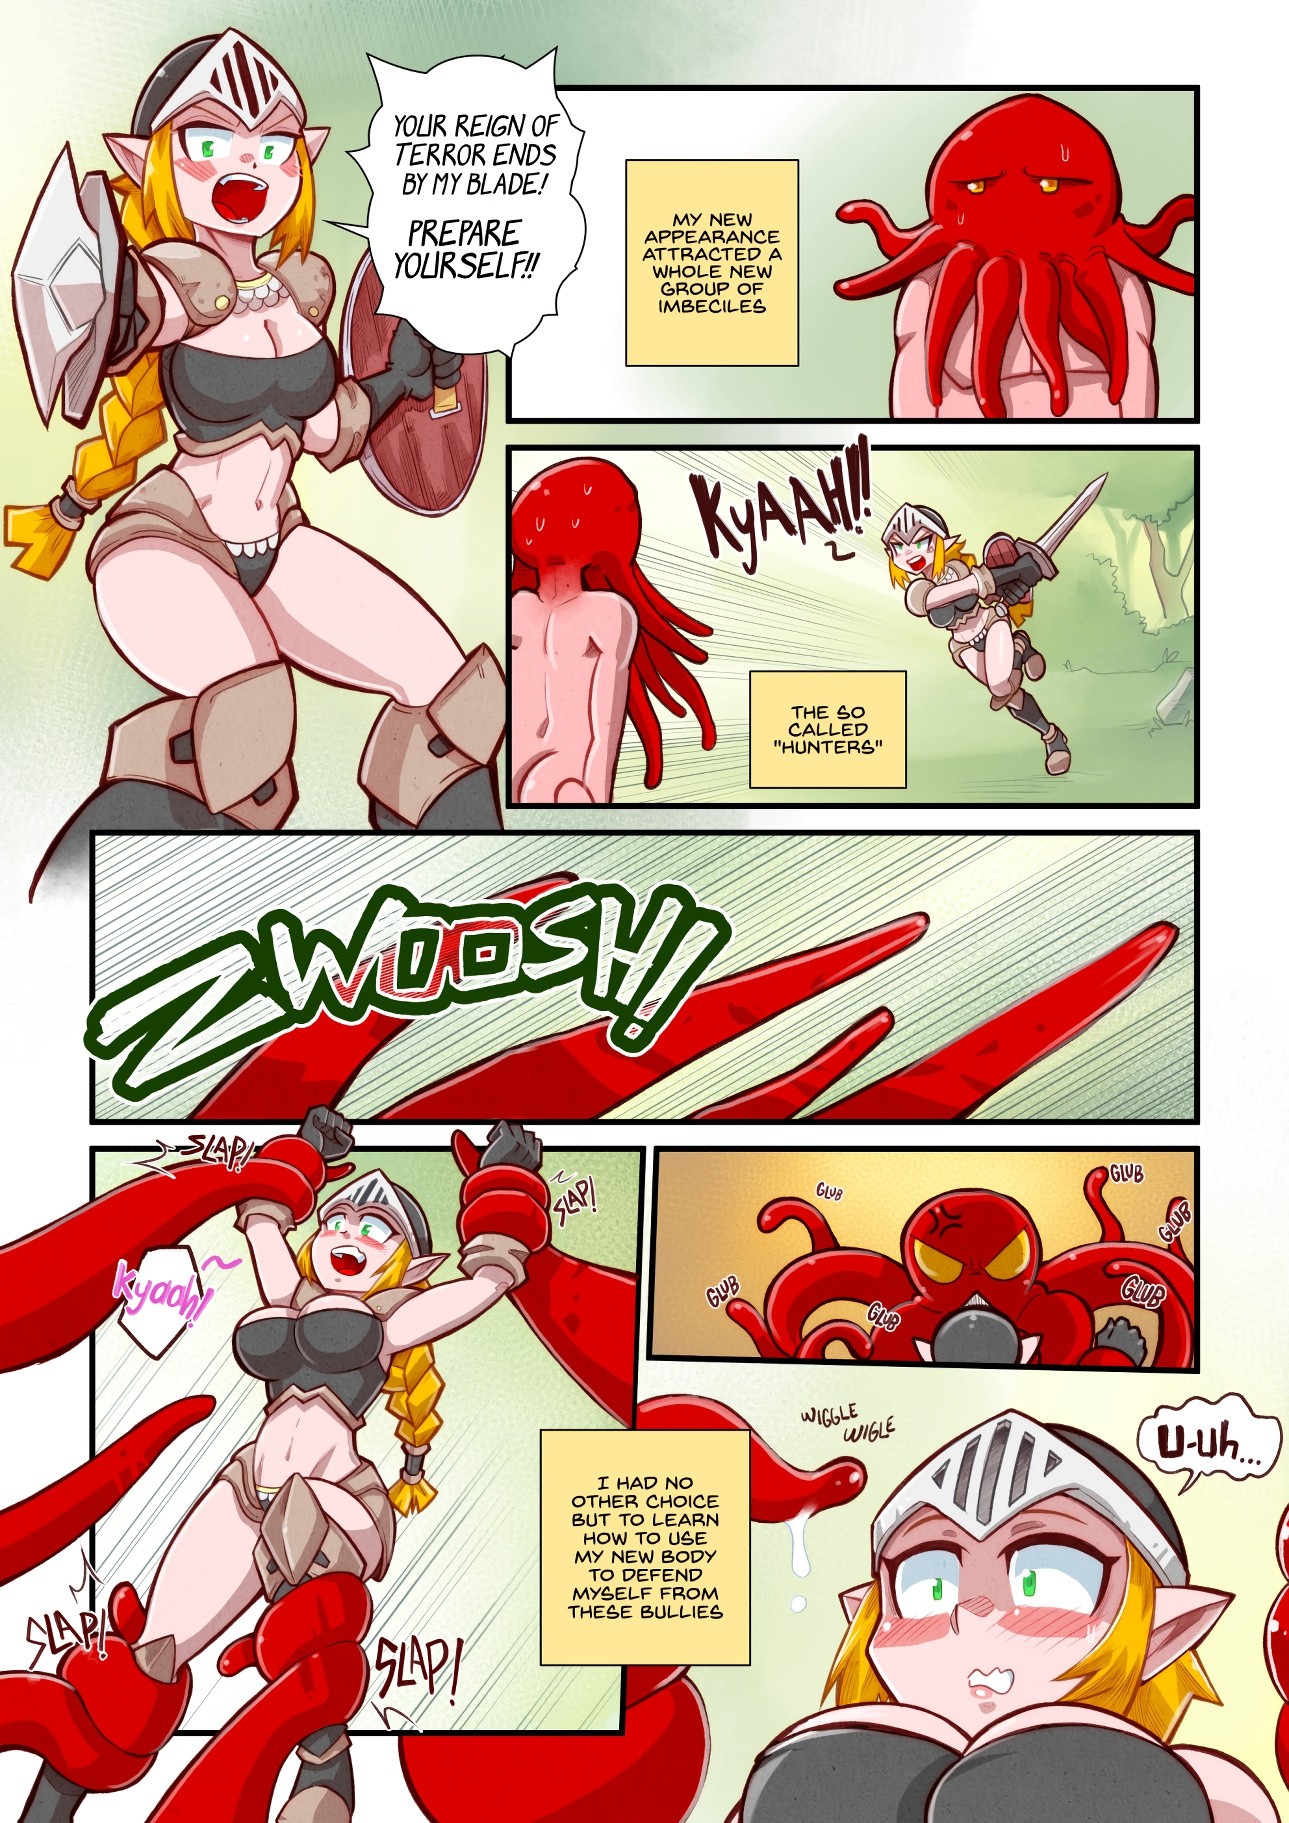 Life as a Tentacle Monster in Another World porn comic picture 5